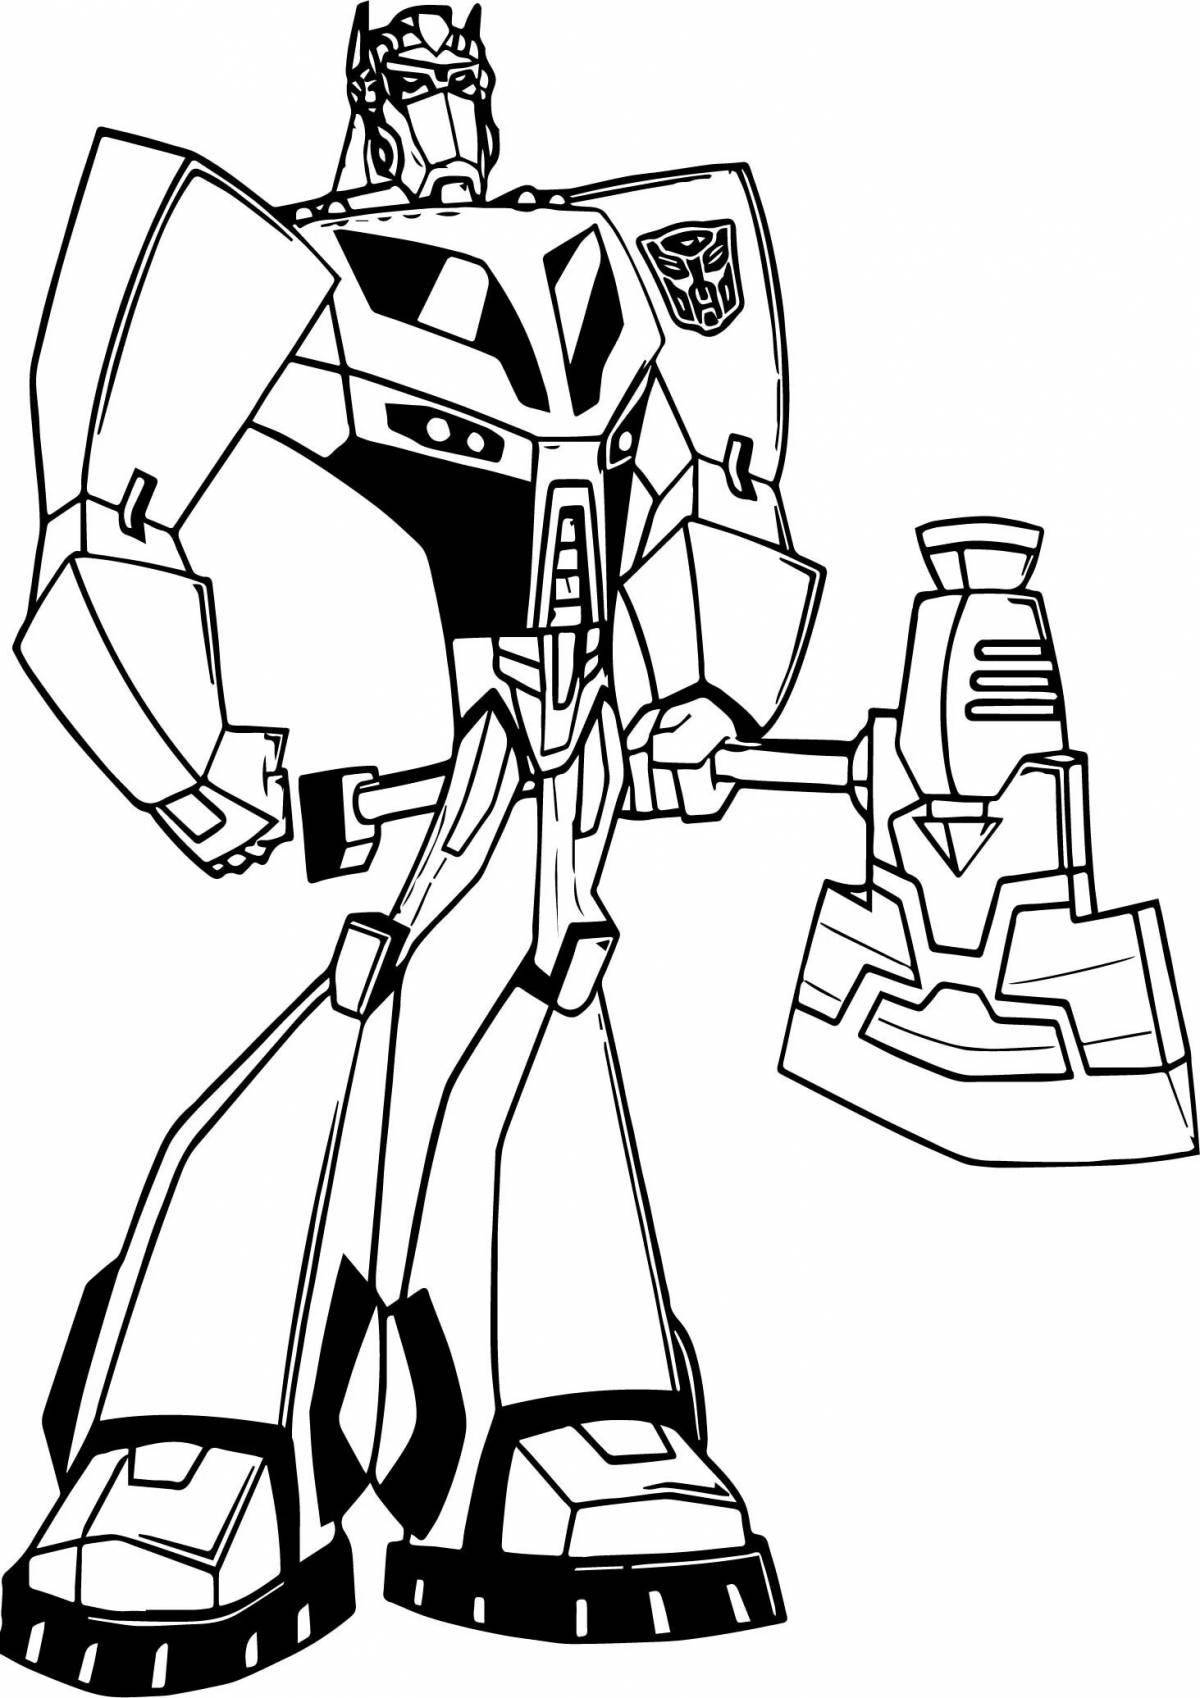 Coloring page adorable bumblebee robot